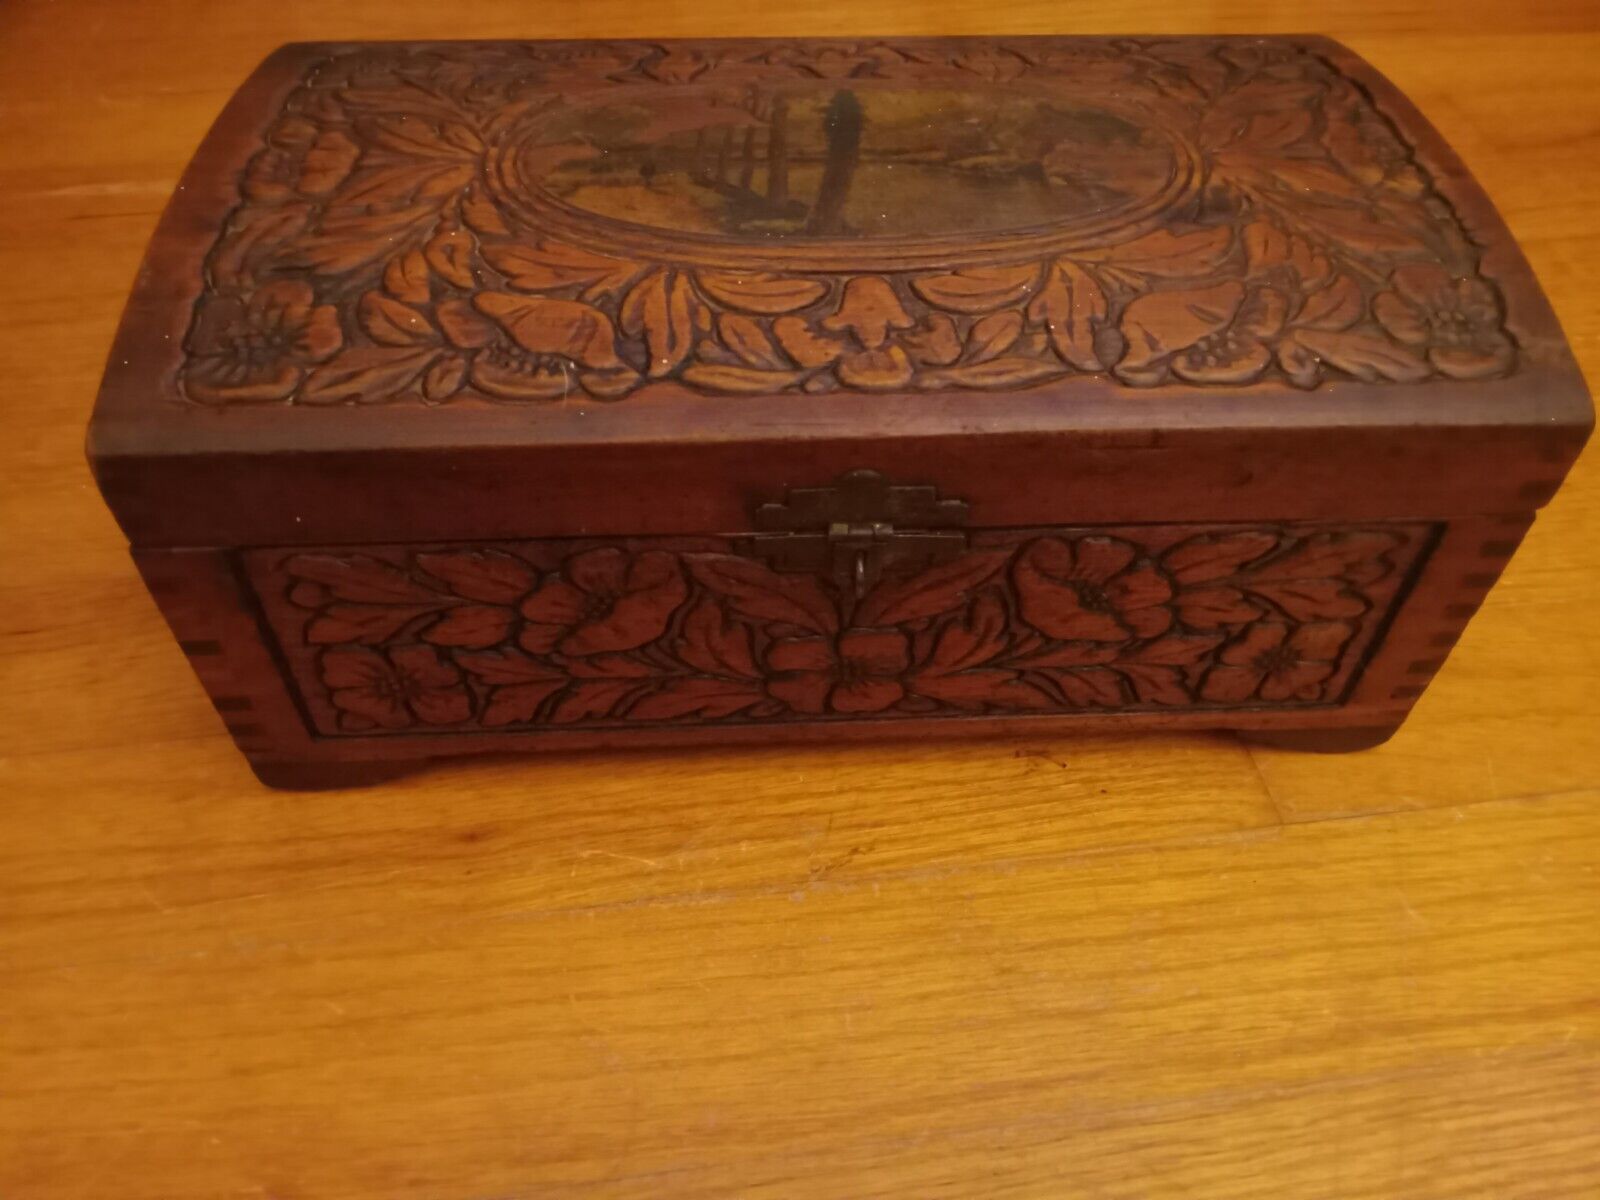 Vintage 1940's Hand-Carved Wooden Cedar Keepsake Footed Chest/Jewelry Box